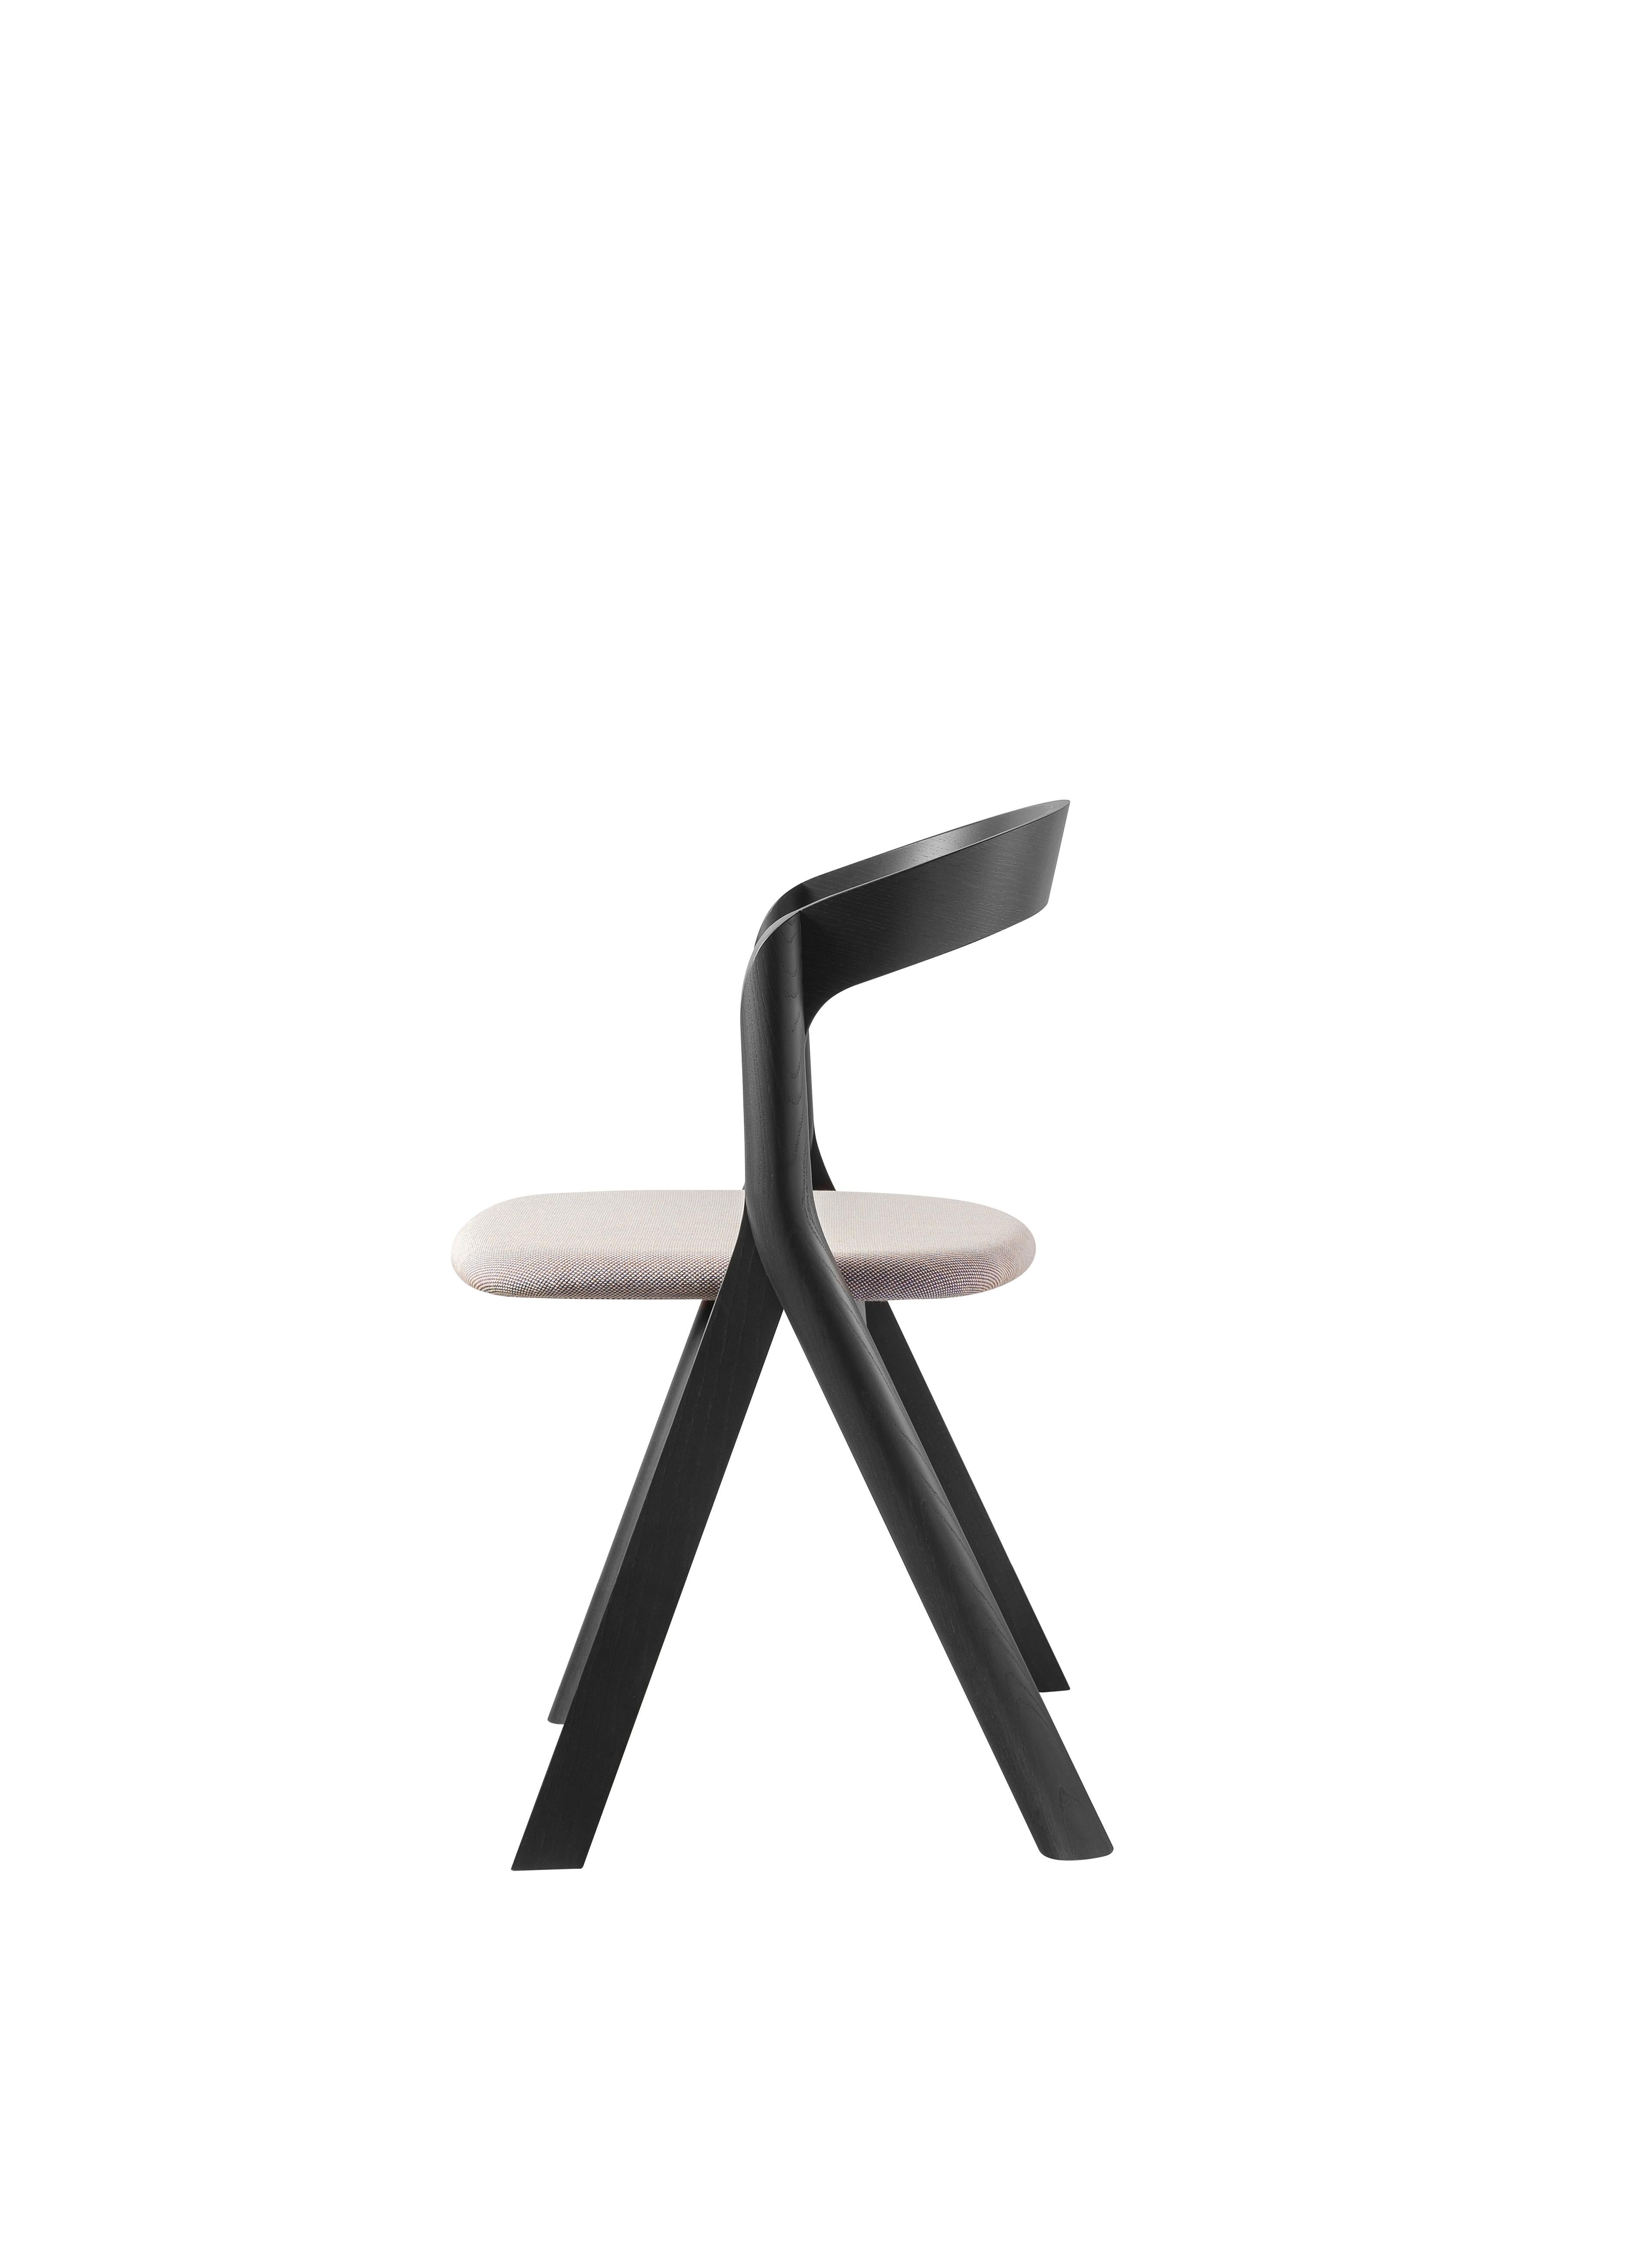 For Sale: Black (Black Ash) Diverge Chair in Wood Structure, Dove Gray Cushion, by Skrivo Design 2